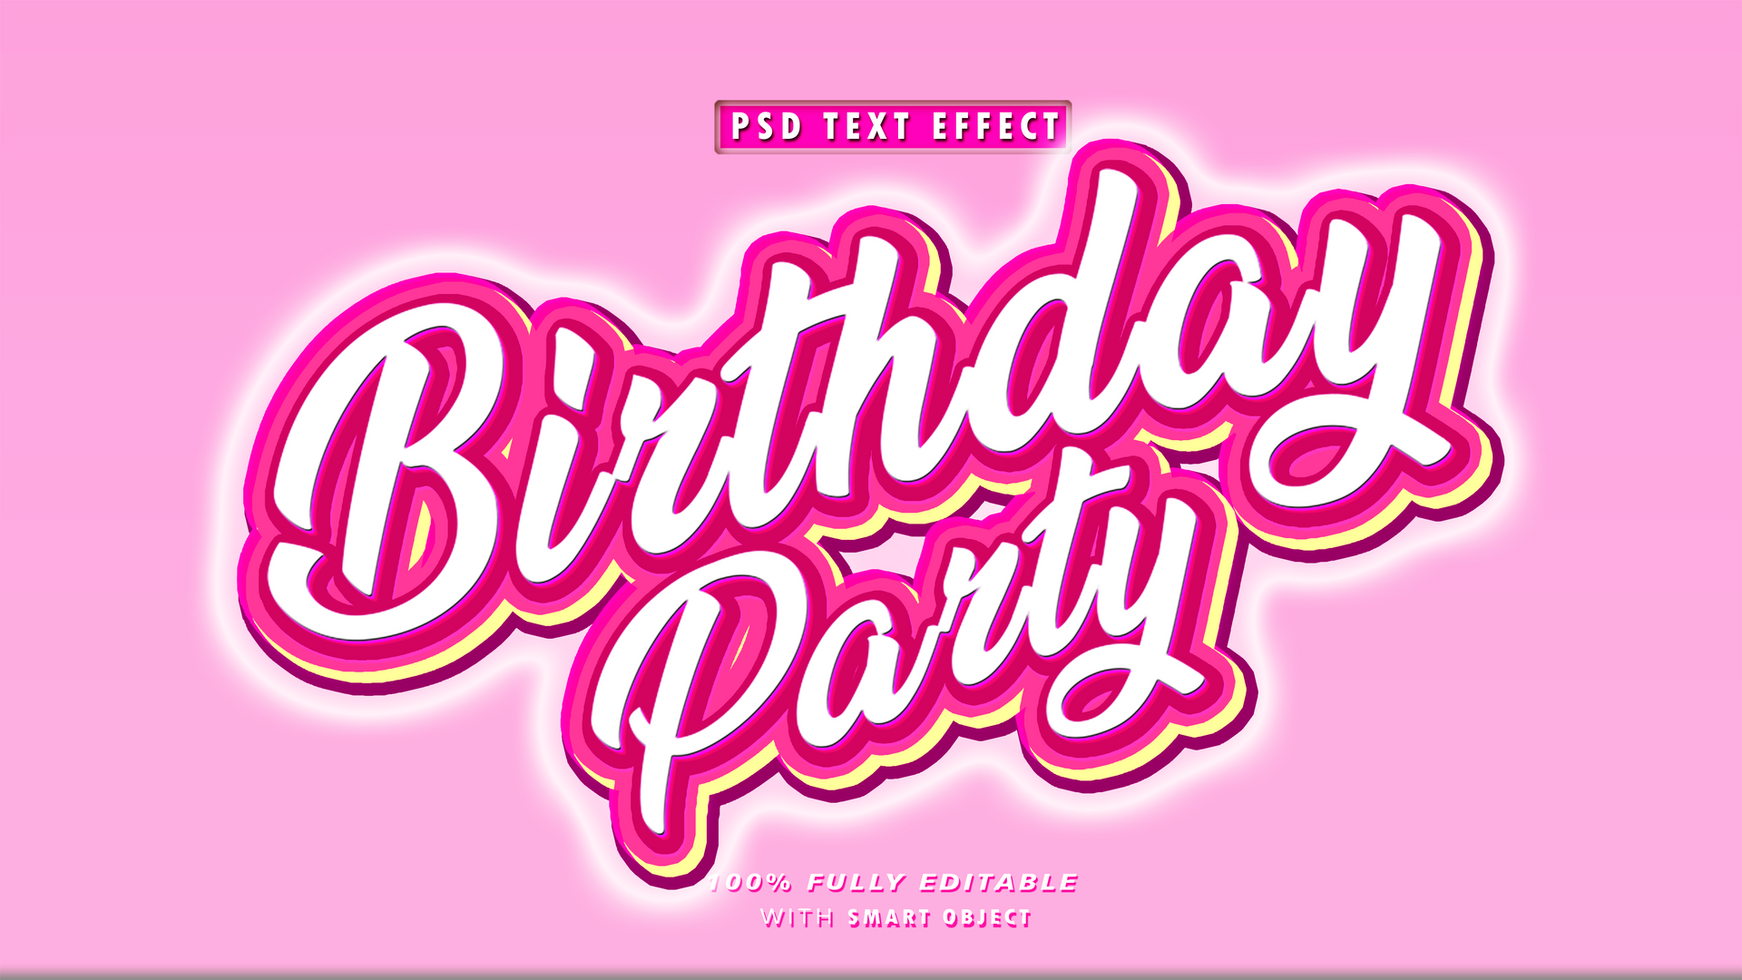 Birthday Party Editable Text Effects psd